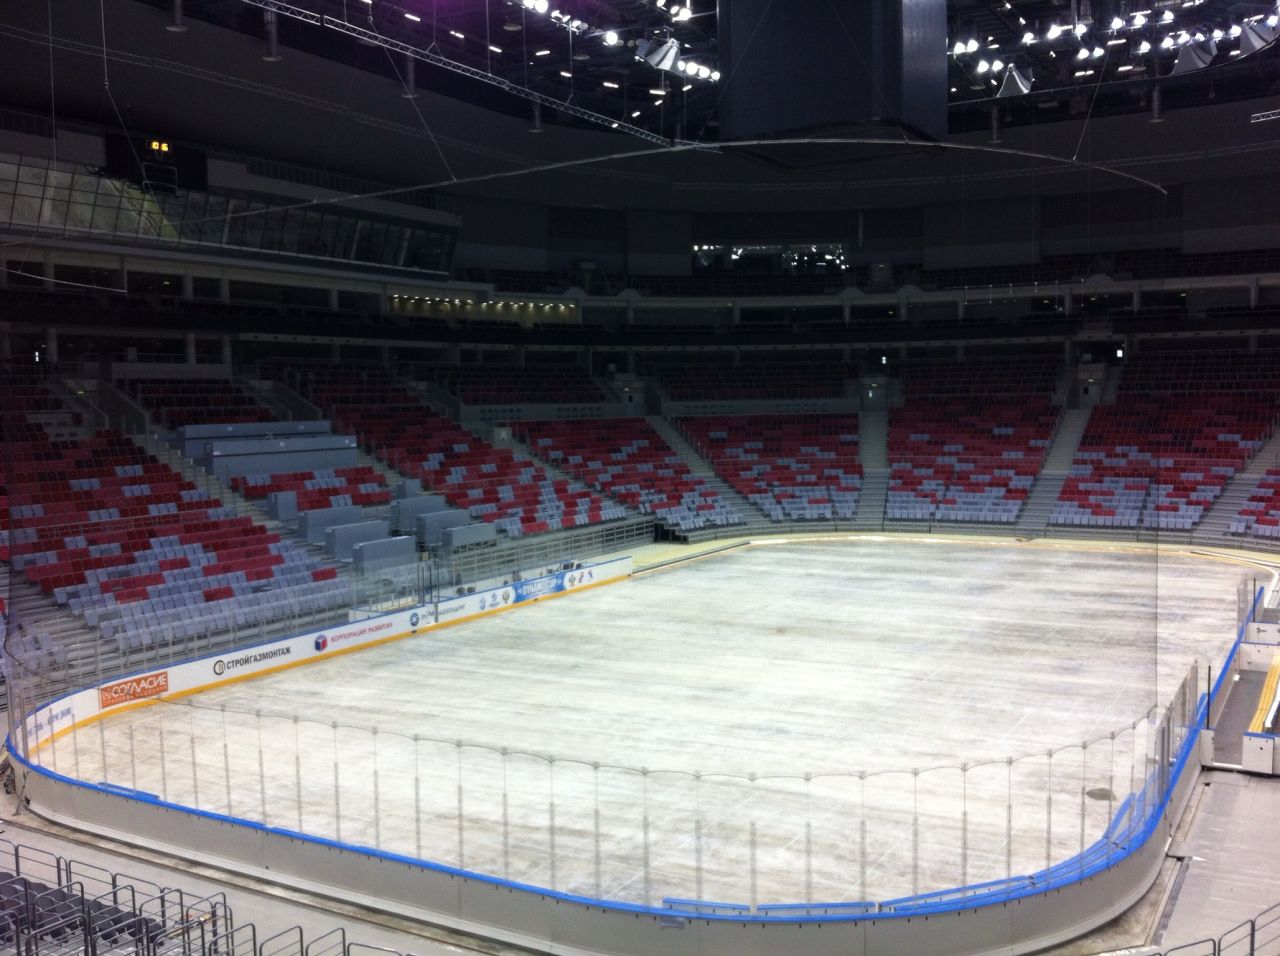 The 12,000 Bolshoi Dome will host the highly-anticipated ice hockey final where the host nation will be hoping to challenge for the gold medal.